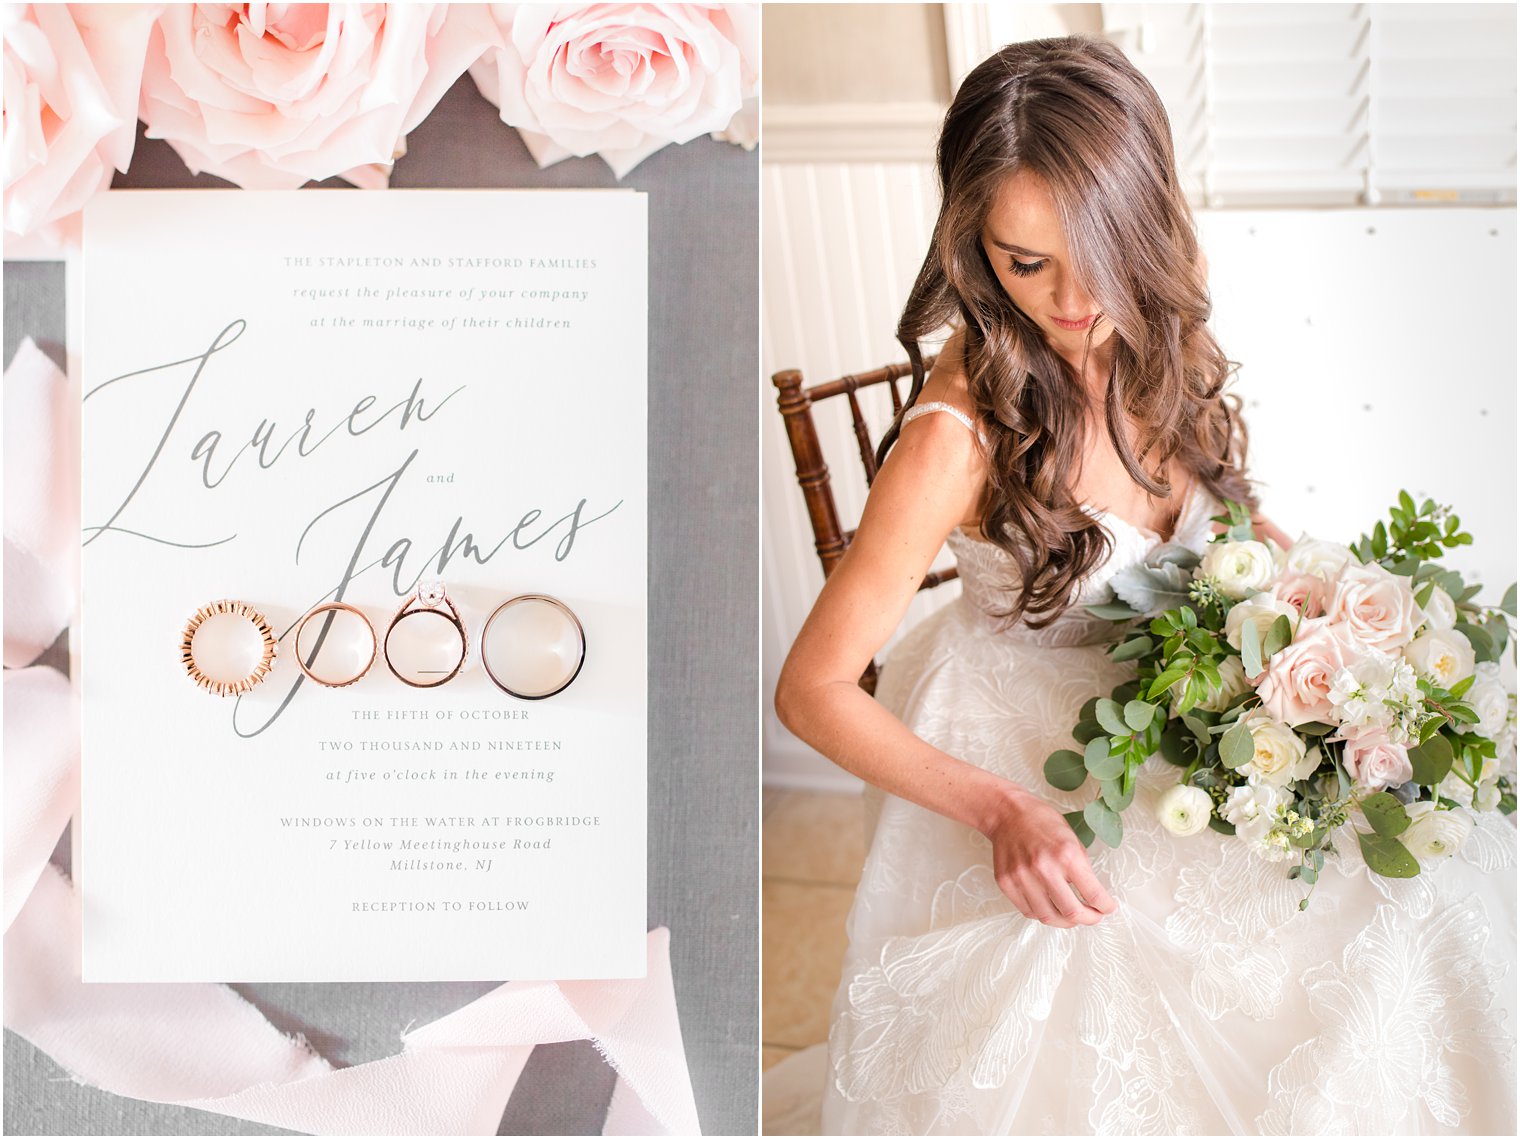 Organic wedding details with pink and ivory florals